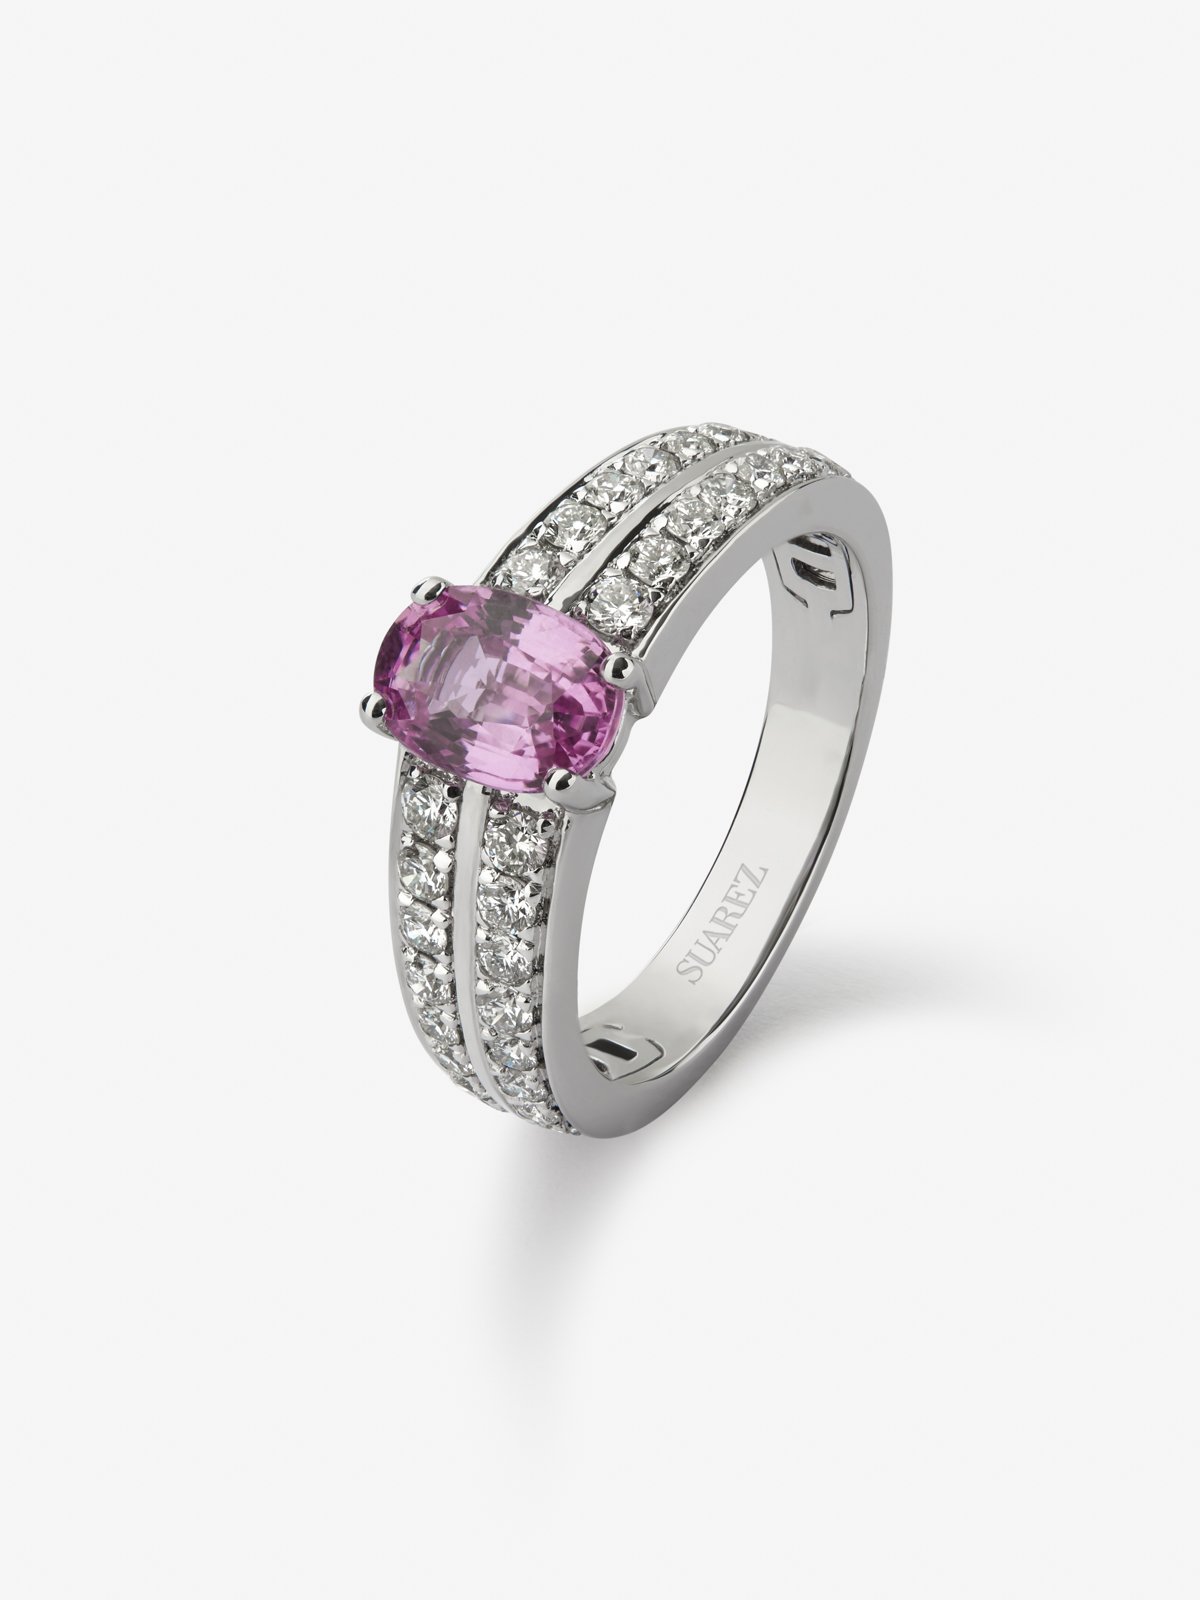 18K white gold ring with vivid pink sapphire in oval cut of 1.46 cts and 32 brilliant-cut diamonds with a total of 0.61 cts